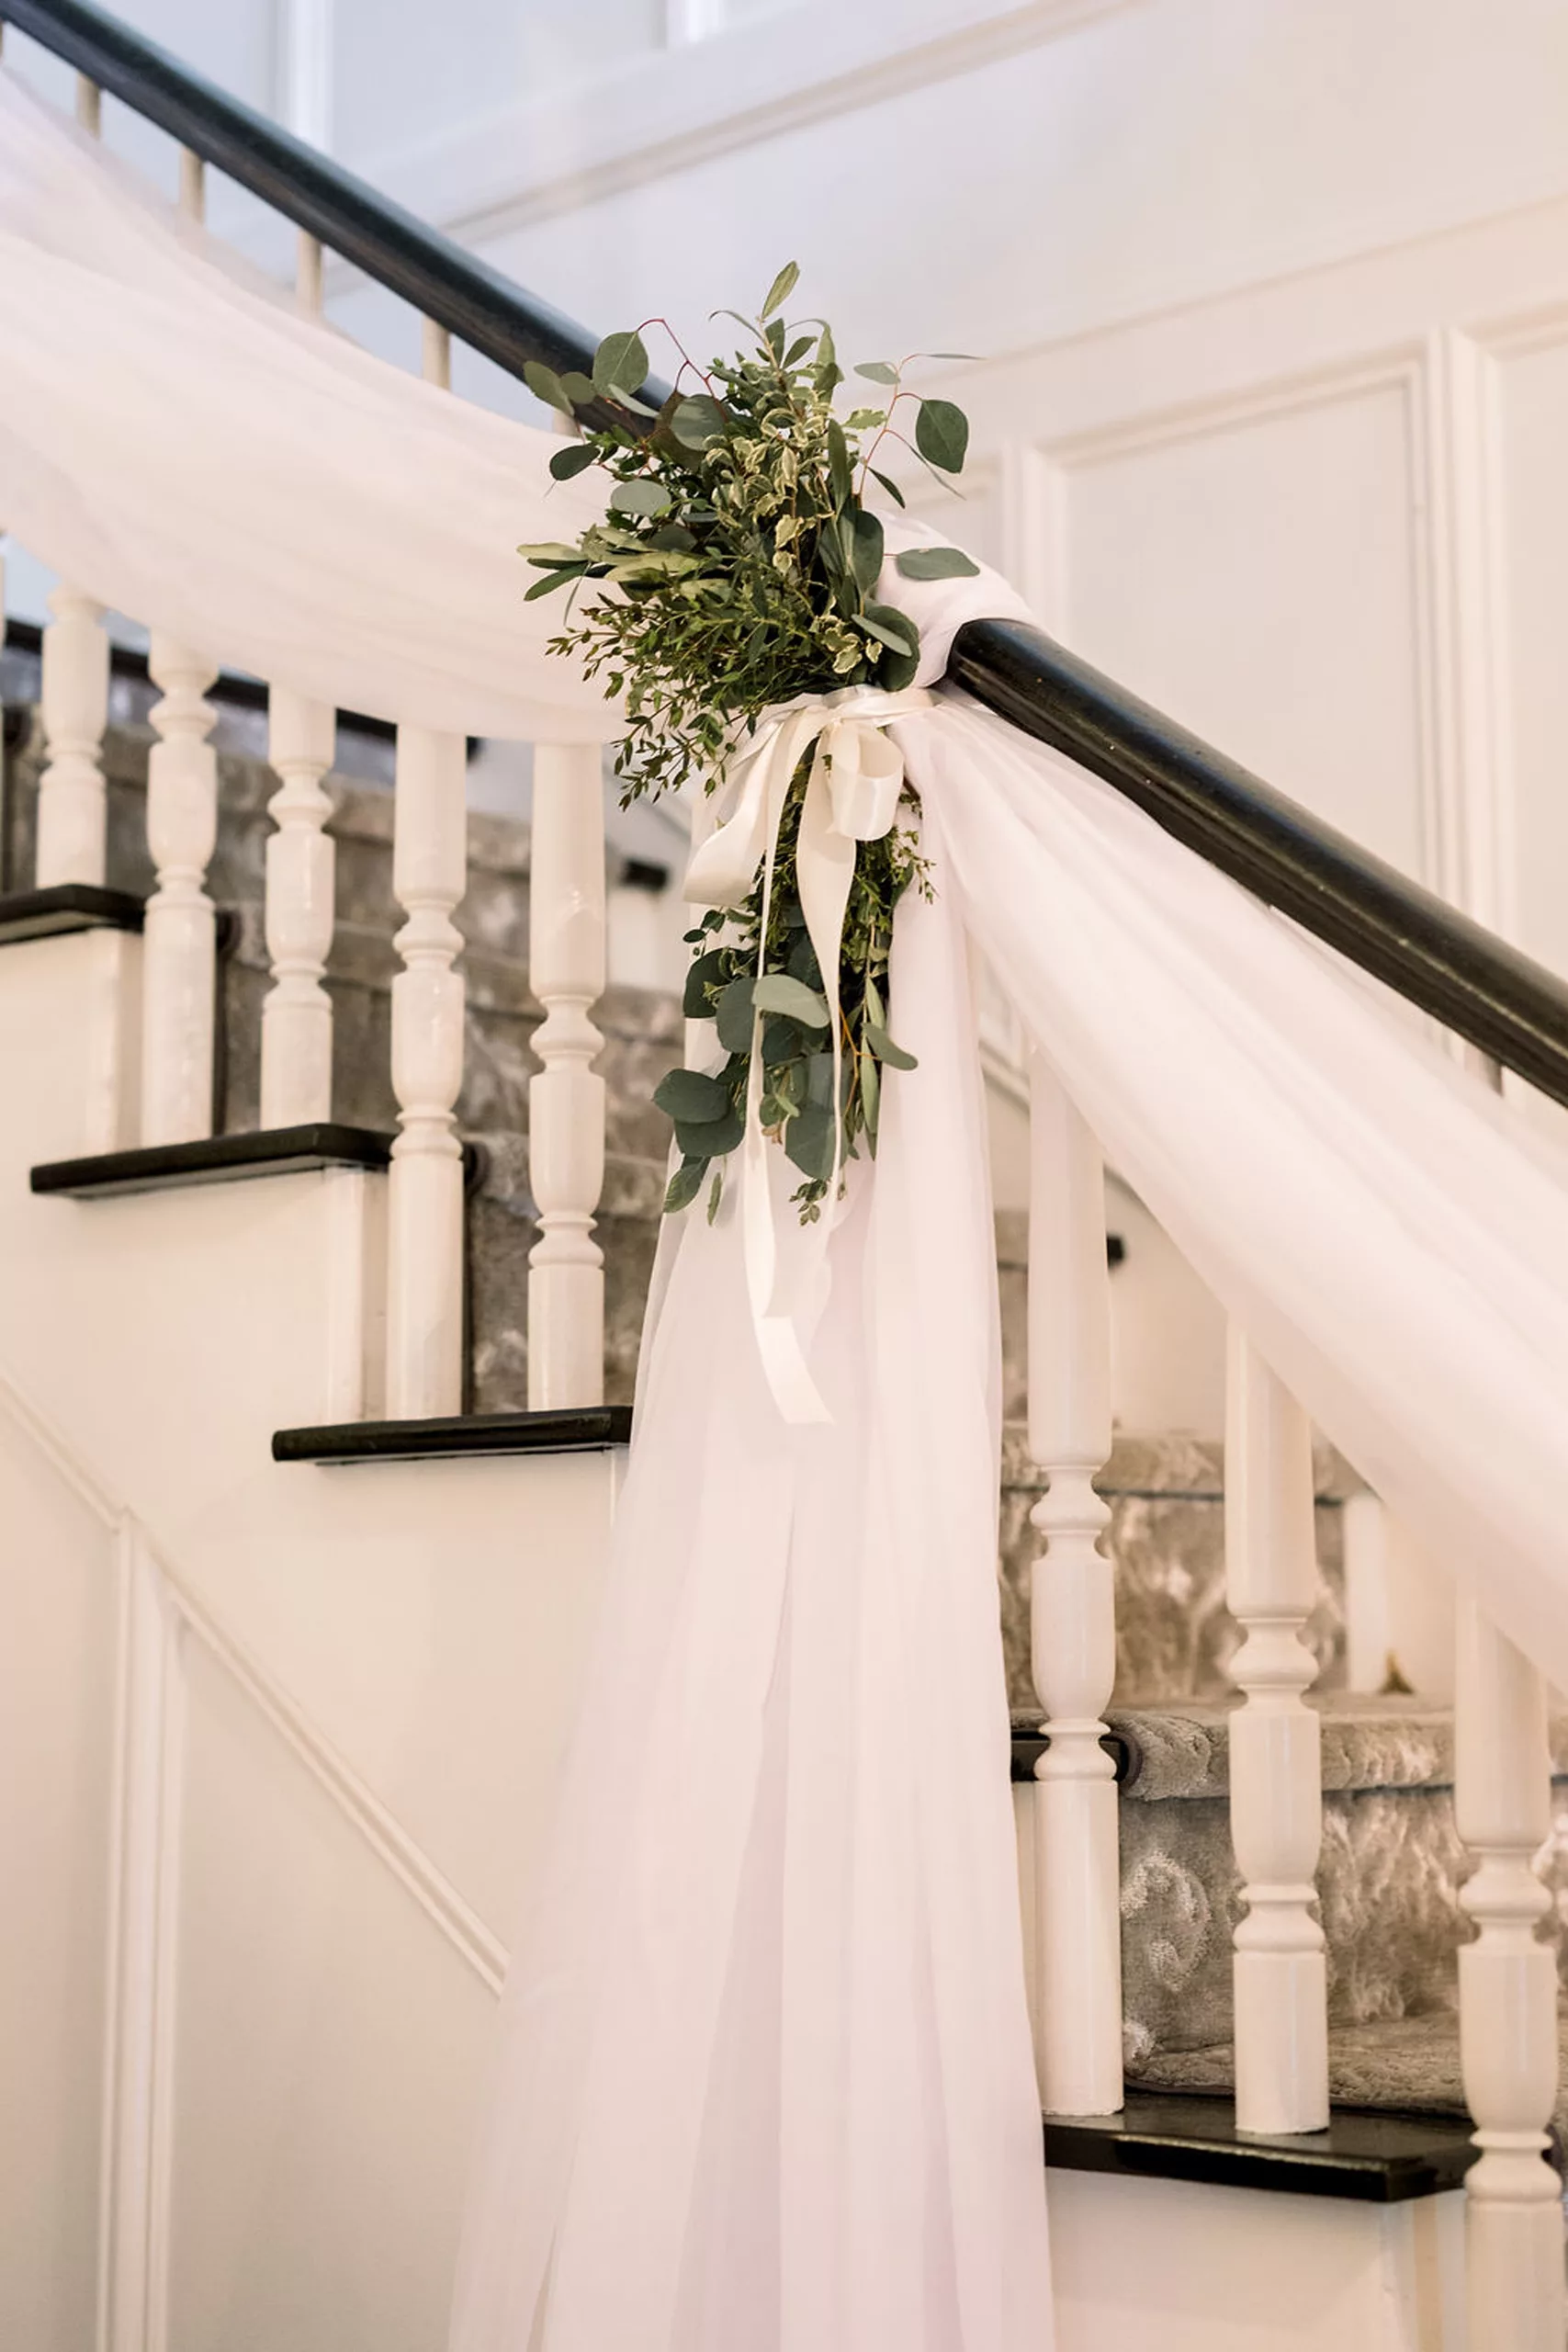 Details of white linens and florals hanging from a handrail on stairs at a payne-corley house wedding